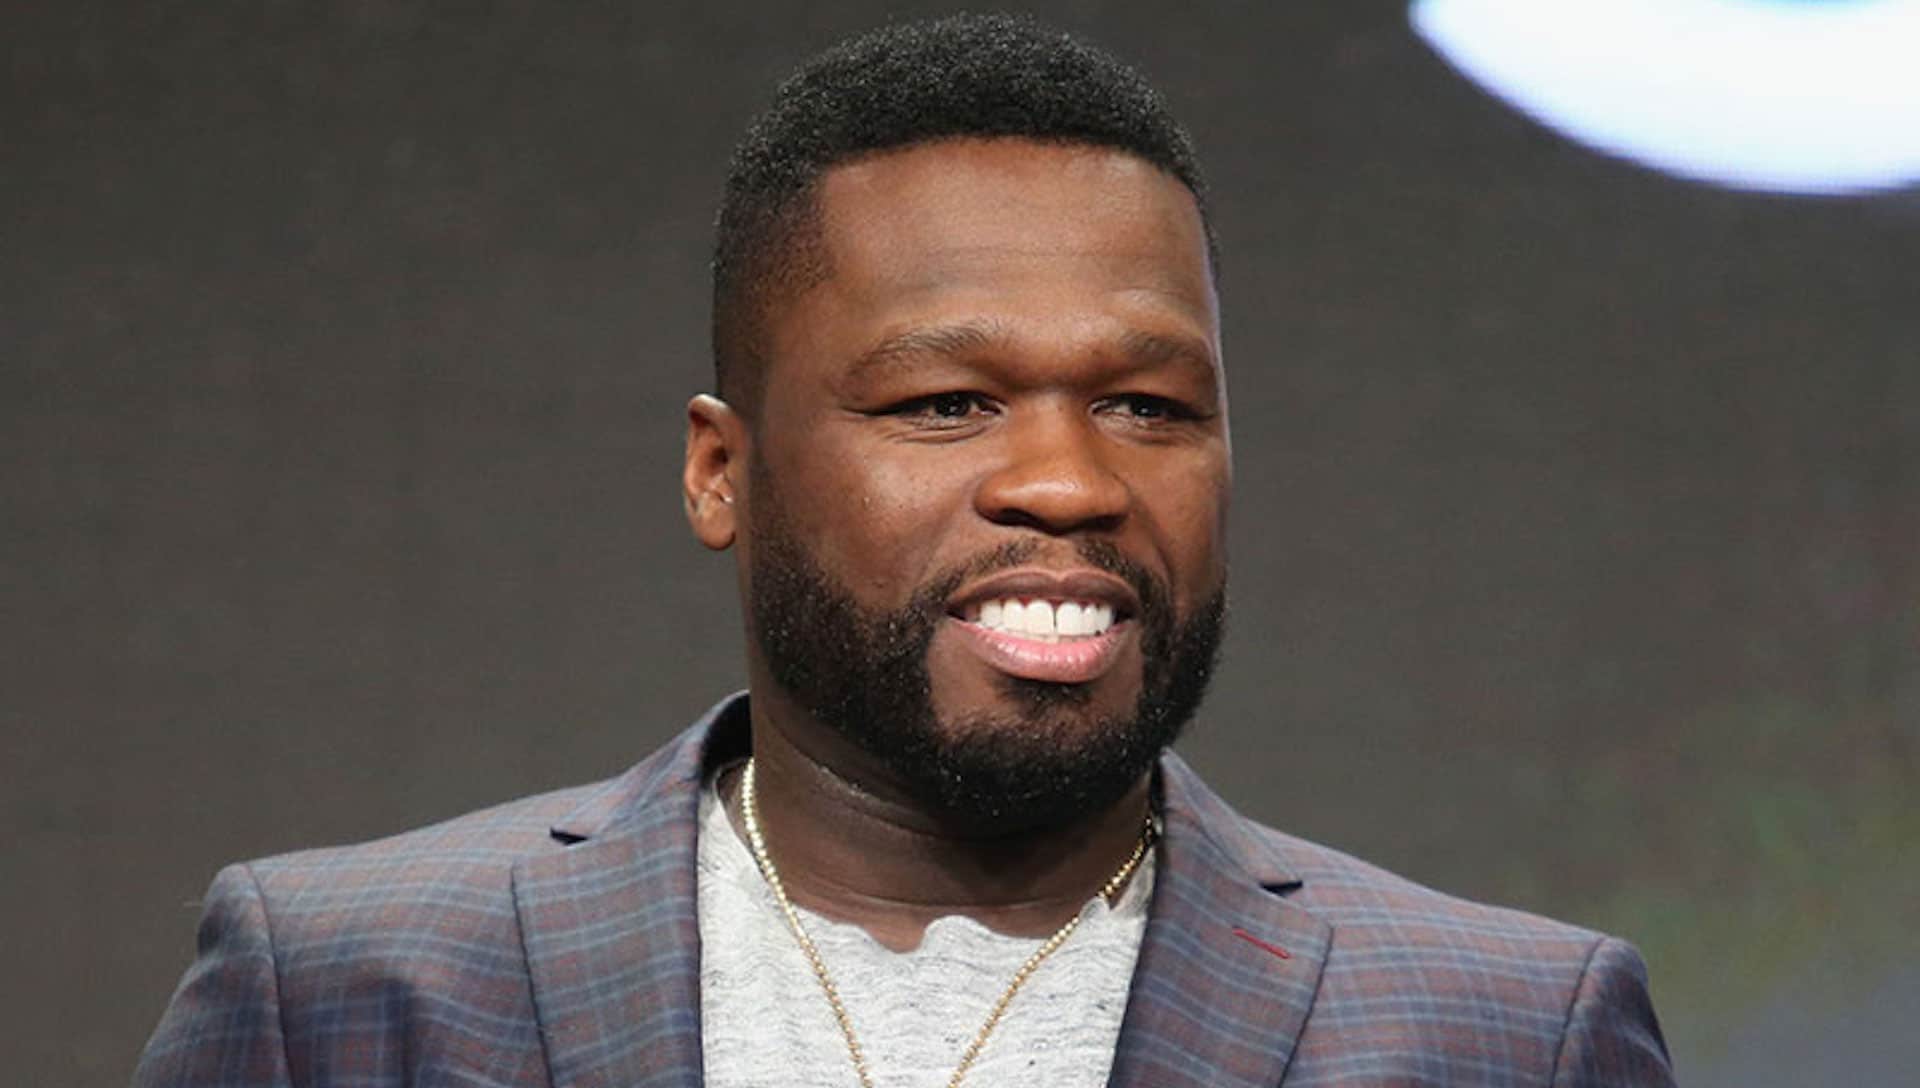 50 Cent Accuses Oprah Winfrey Of ‘Going After Black Men’ With Russell Simmons Documentary